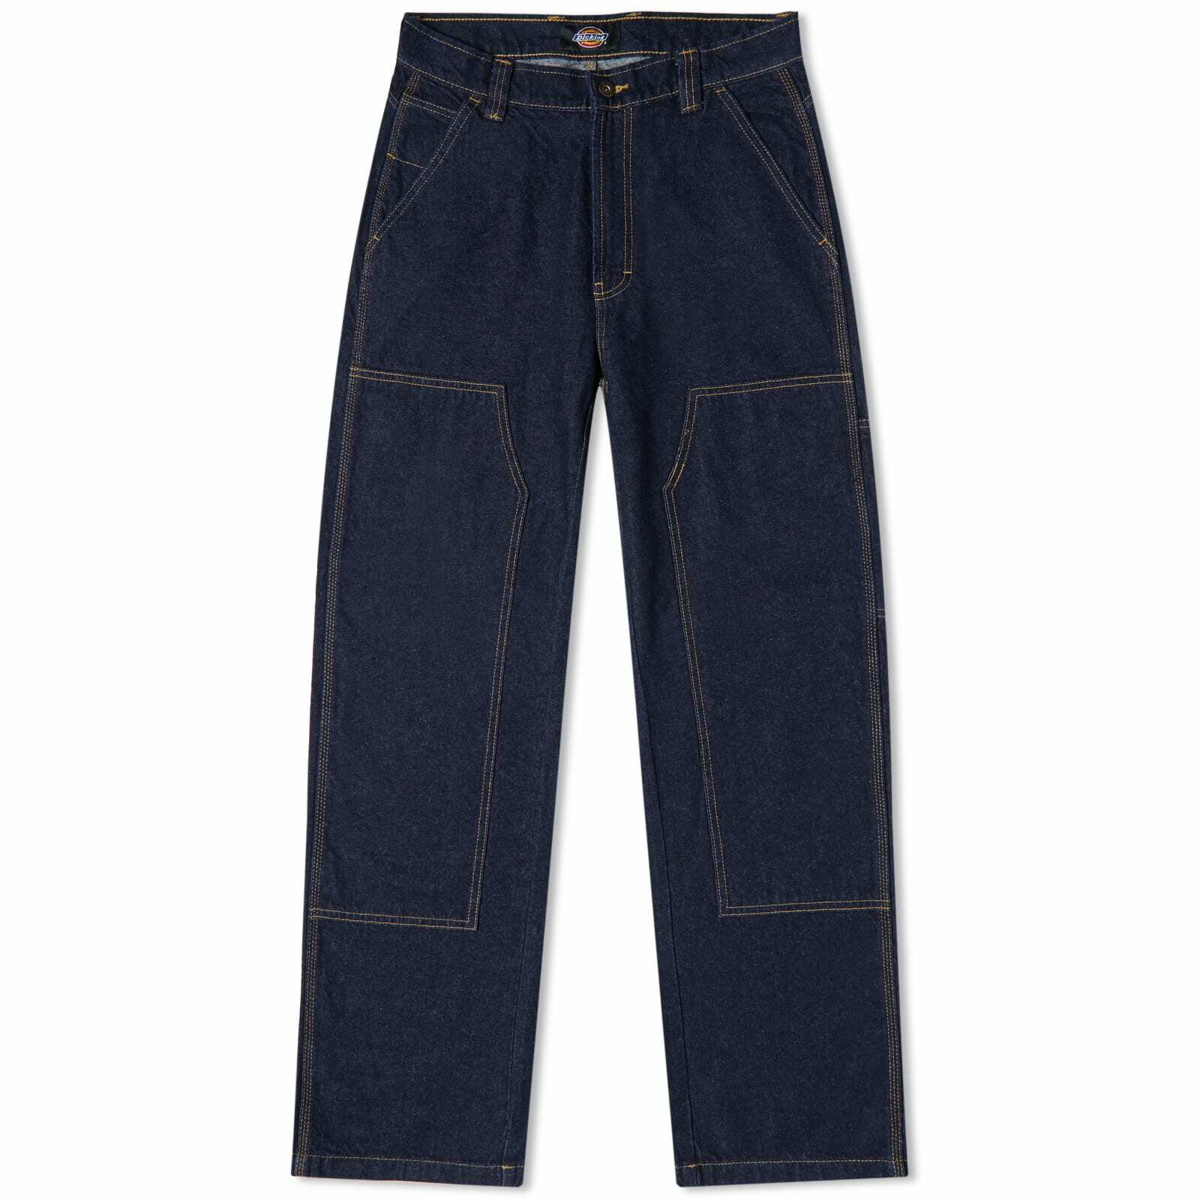 Dickies Women's Madison Double Knee Jeans in Rinsed Dickies Construct